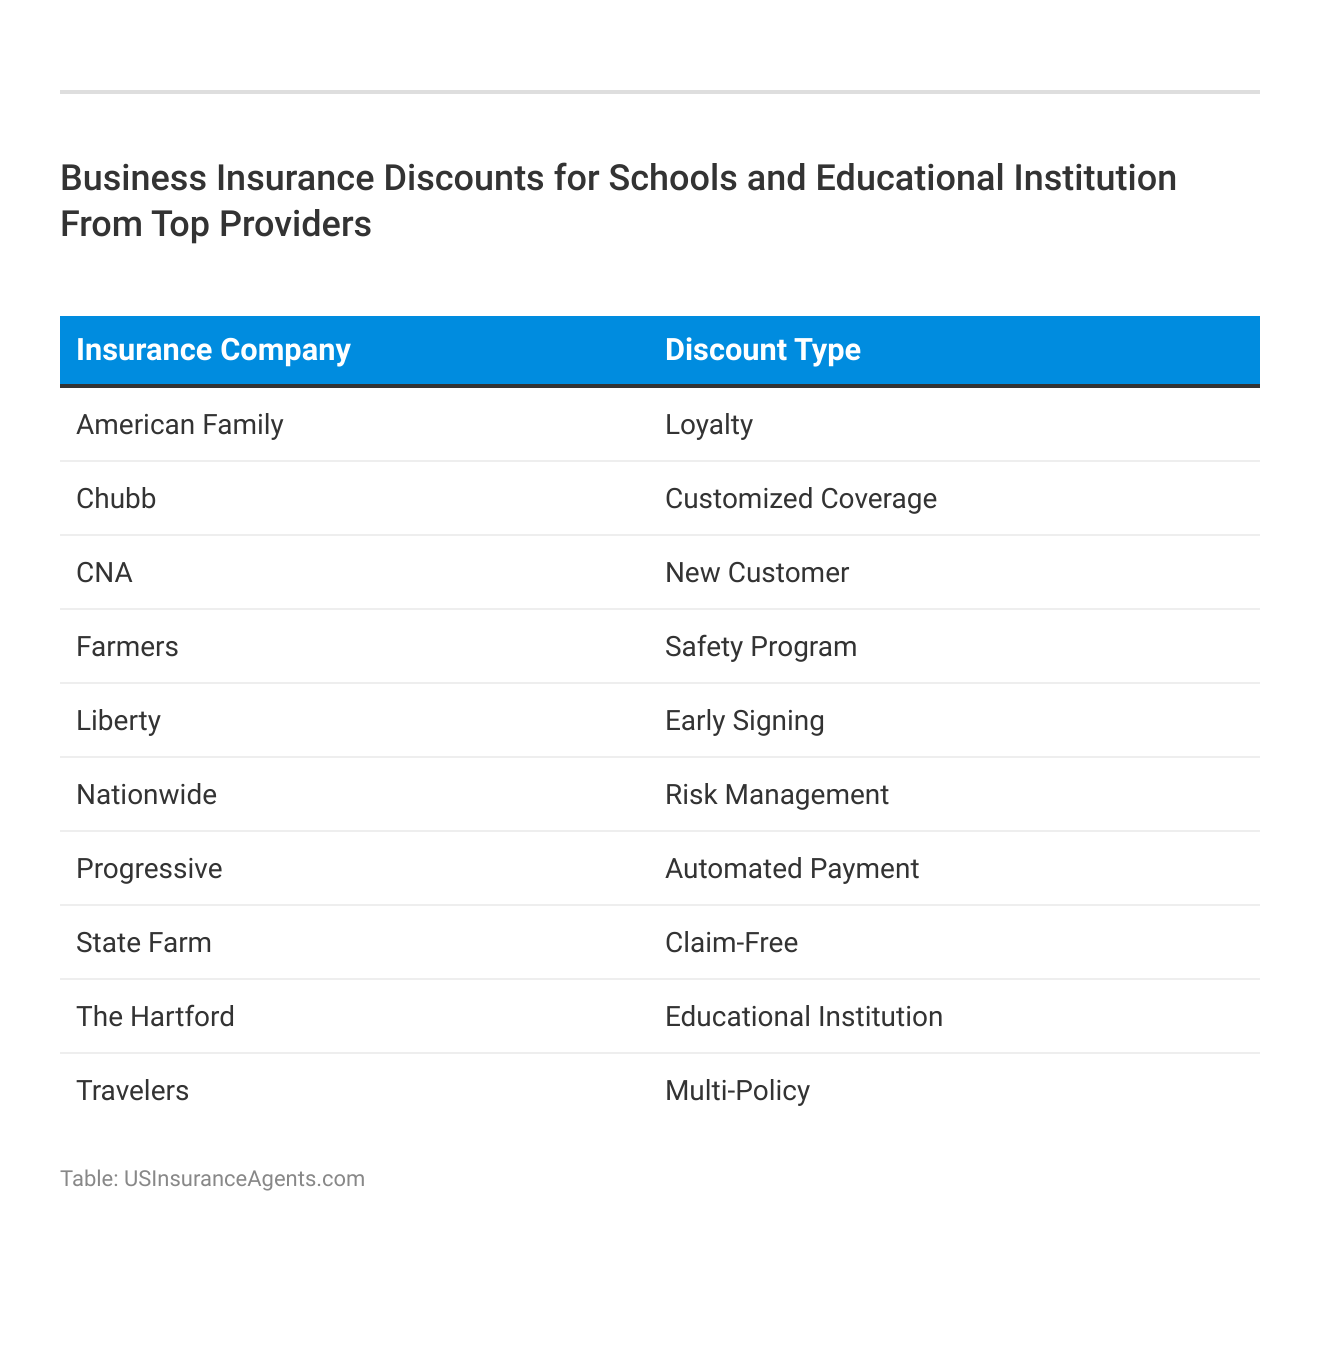 <h3>Business Insurance Discounts for Schools and Educational Institution From Top Providers</h3>